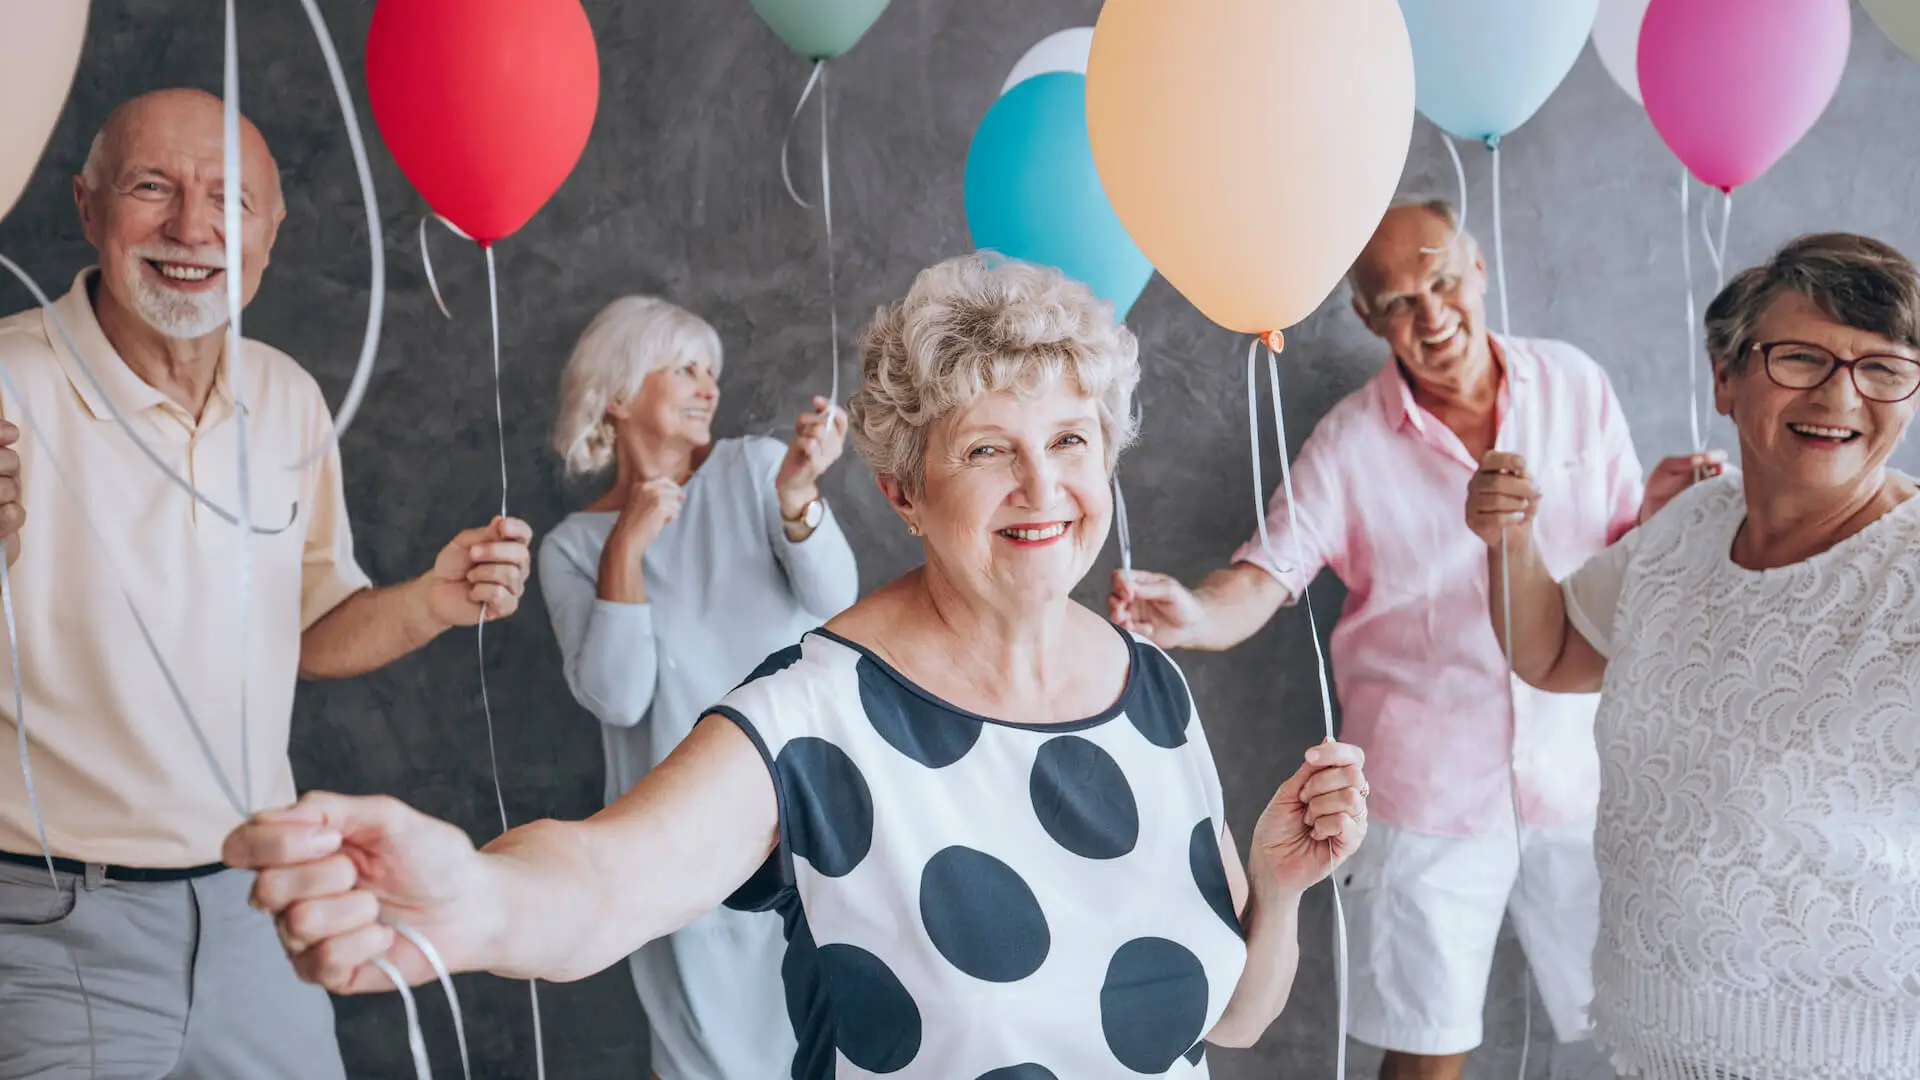 Smiling grandmother wearing a blouse with black dots during New Year's Eve party with friends holding colorful balloons